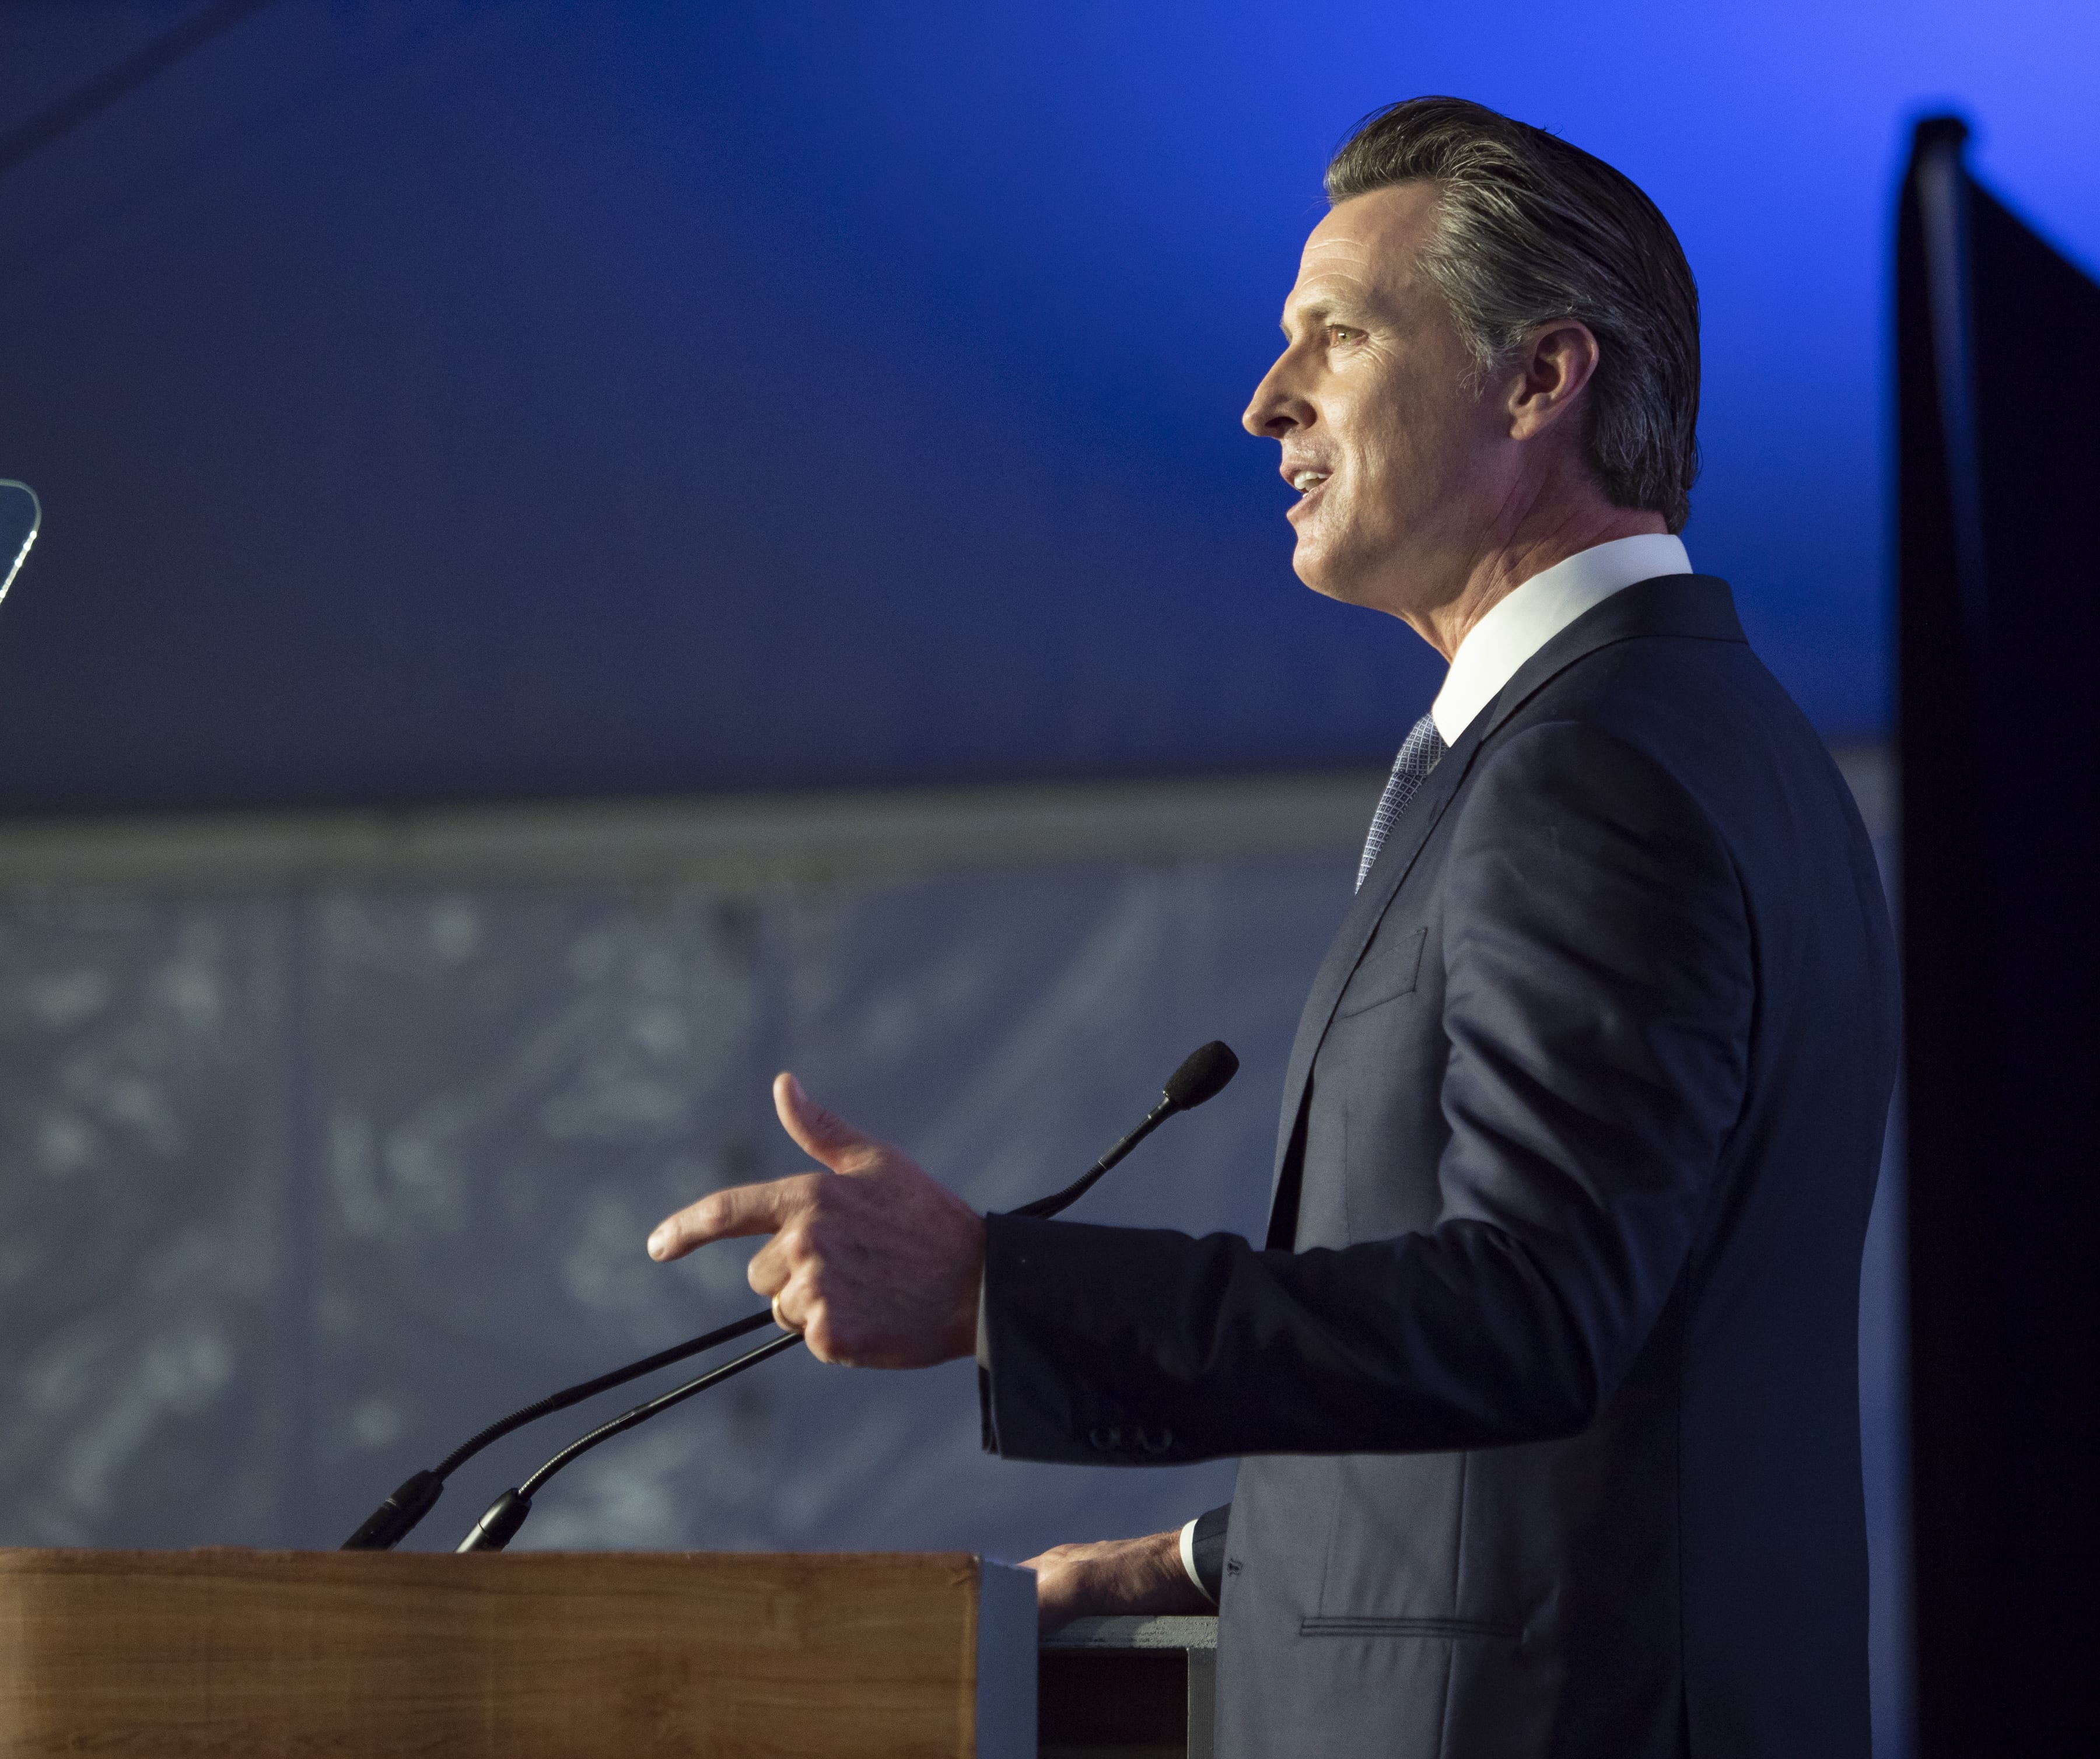 Governor Newsom Submits May Revision Budget Proposal to Legislature 5.14.20